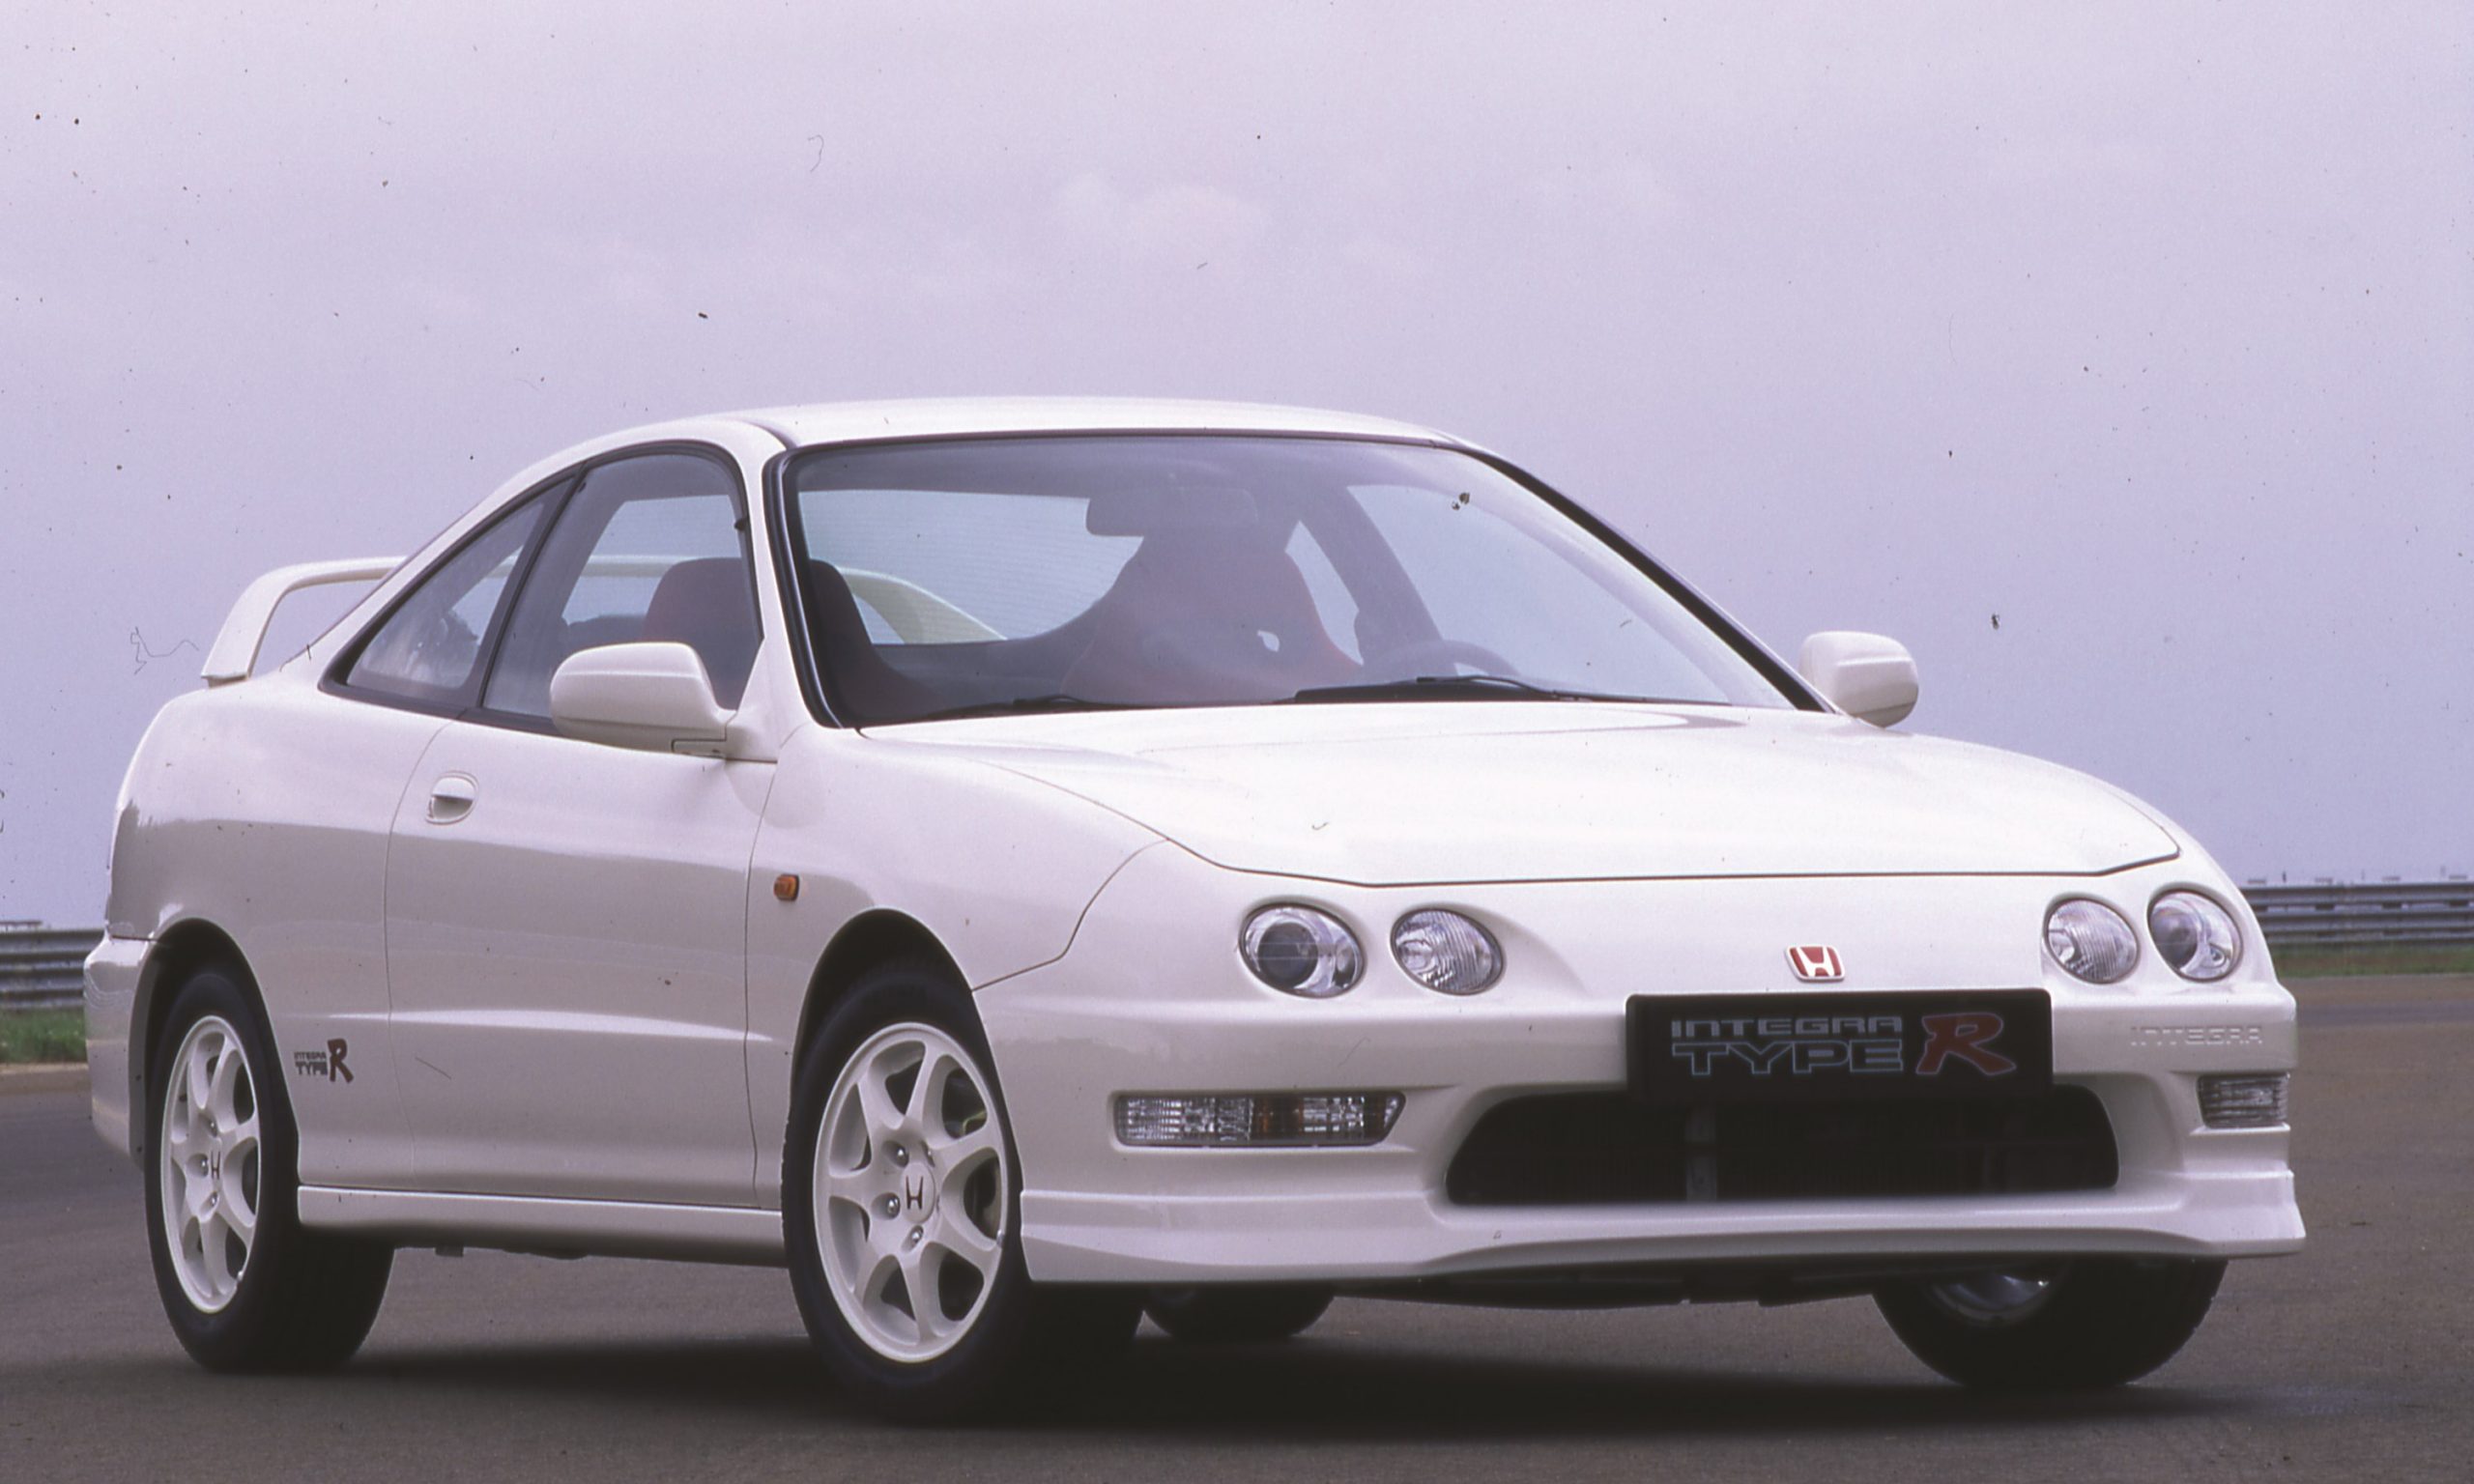 The Integra lives on! But will it be anywhere near as good as the original Integra Type-R?